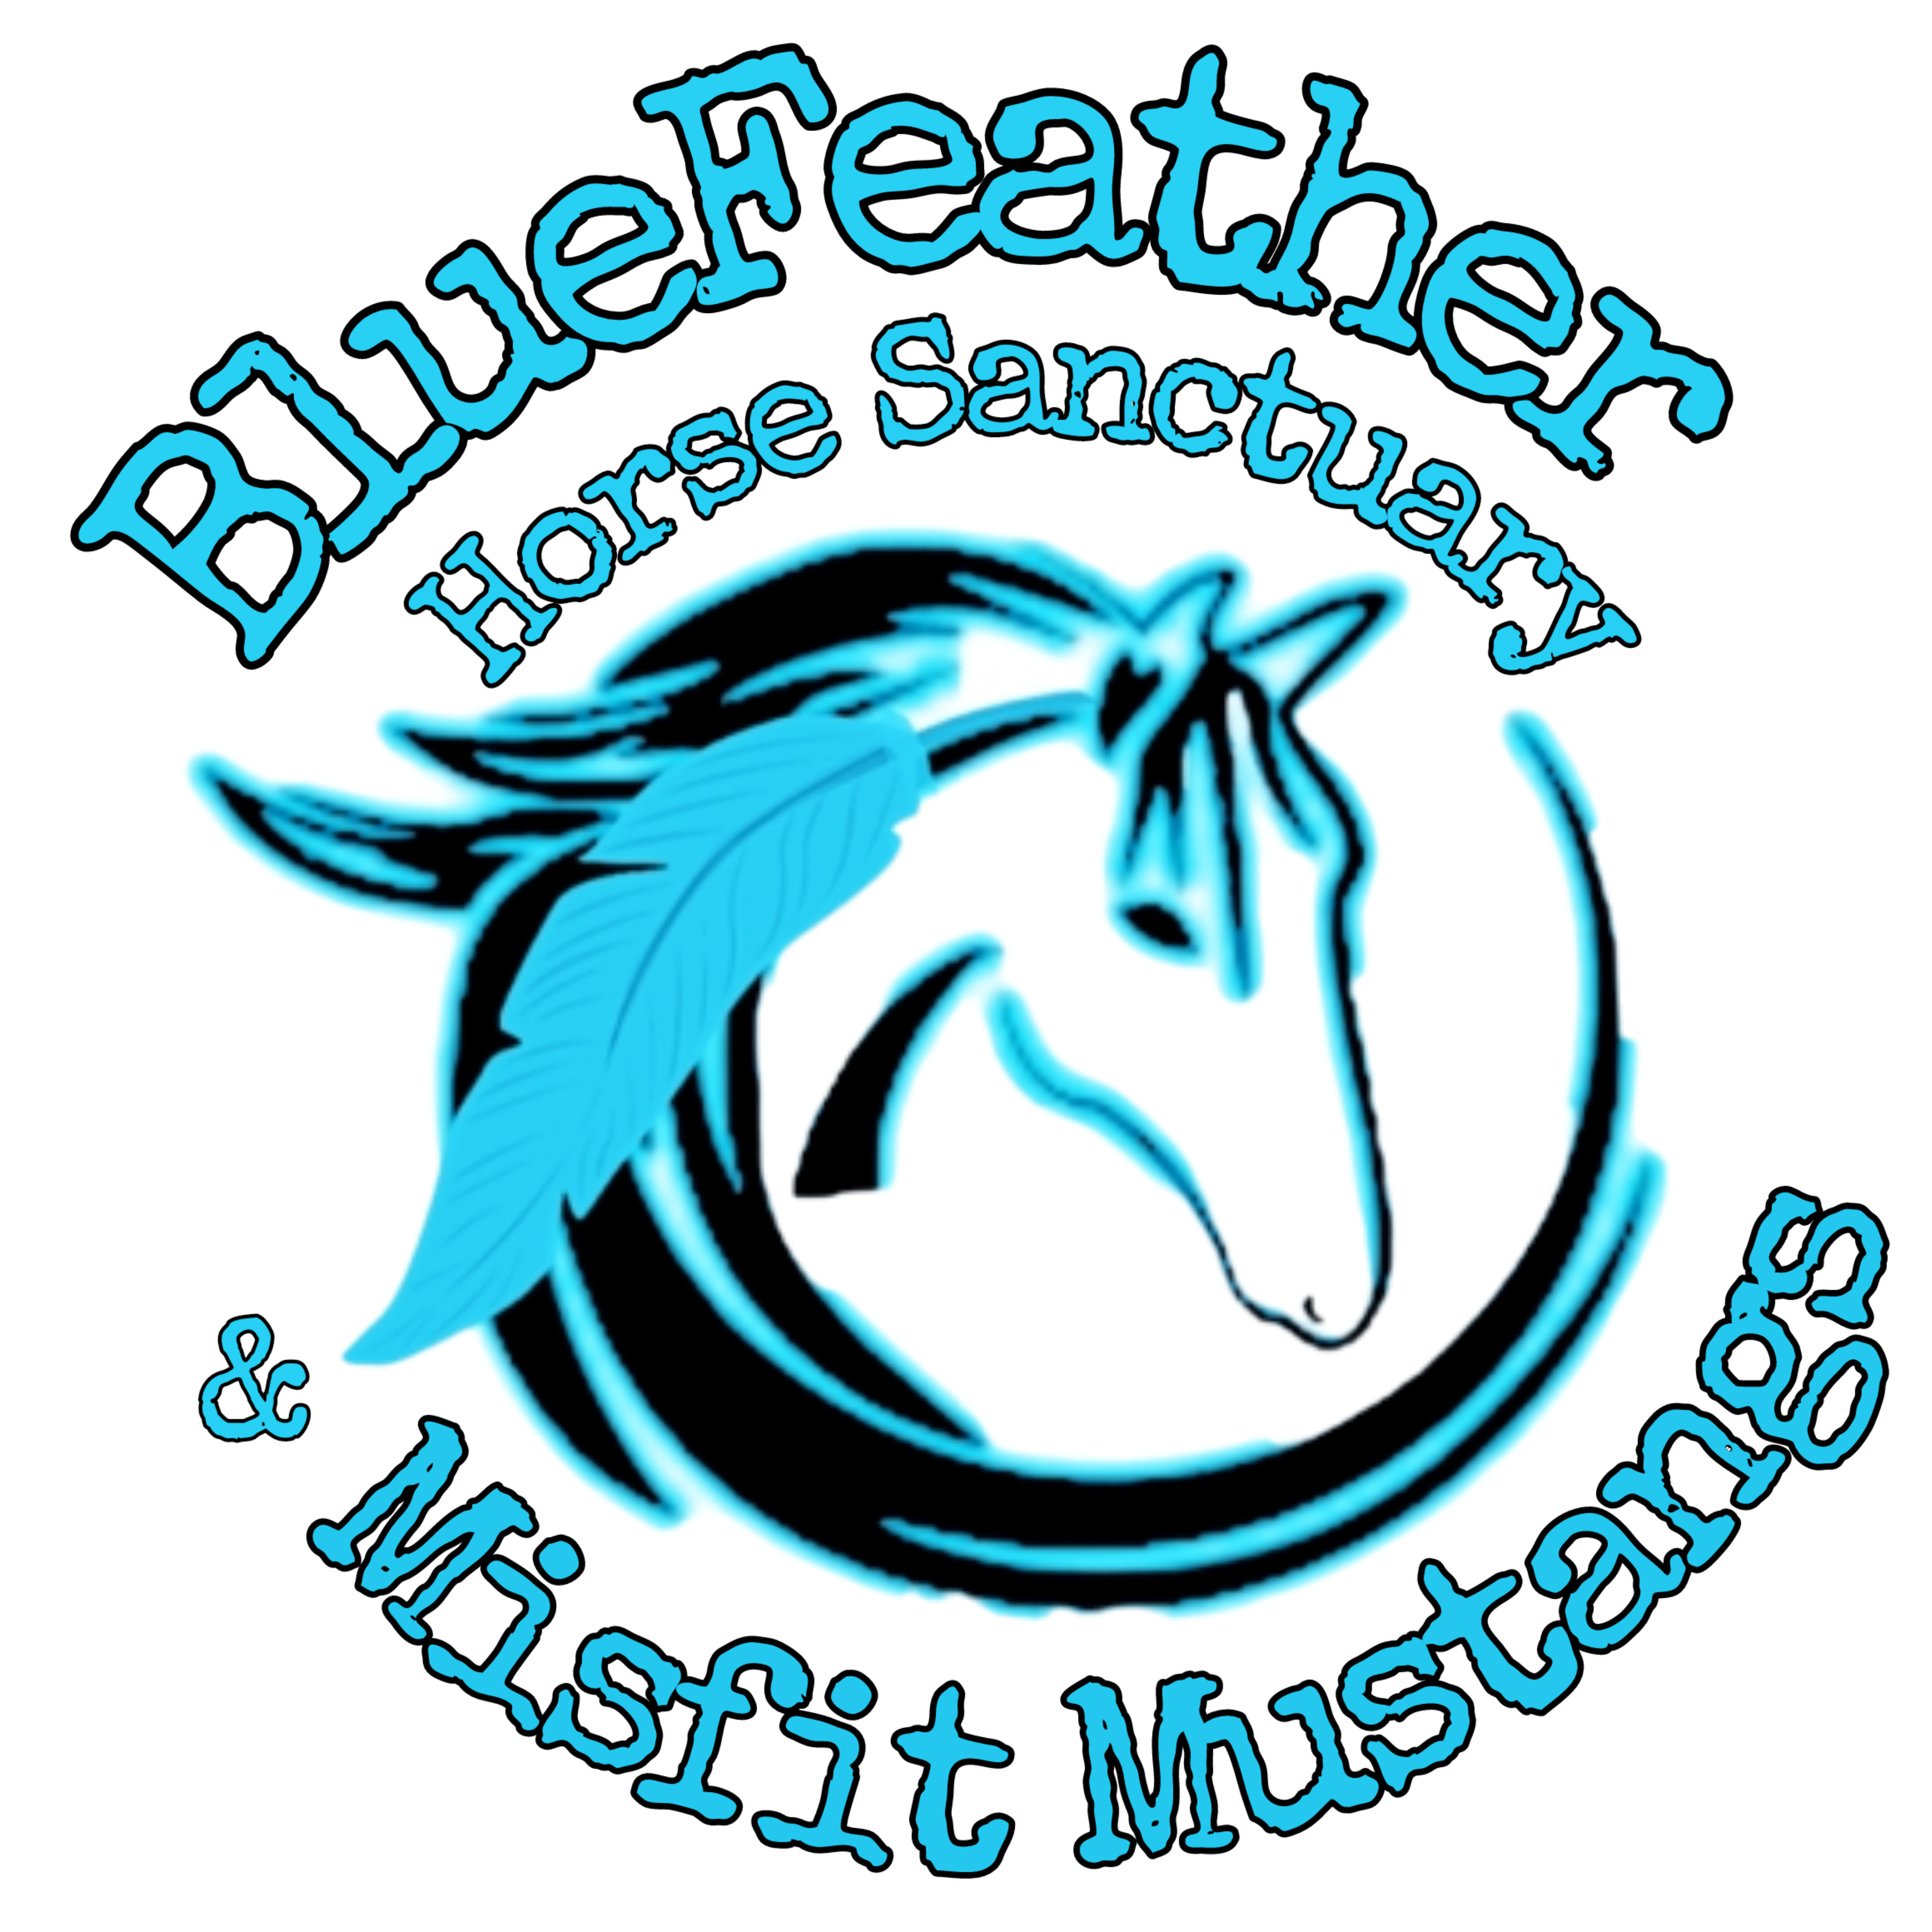 BlueFeather Horse Sanctuary and Misfit Mustangs